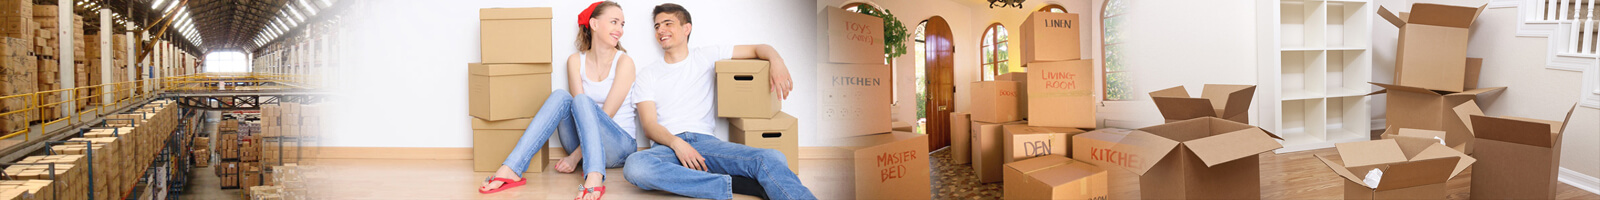 packers and movers services in Chandigarh